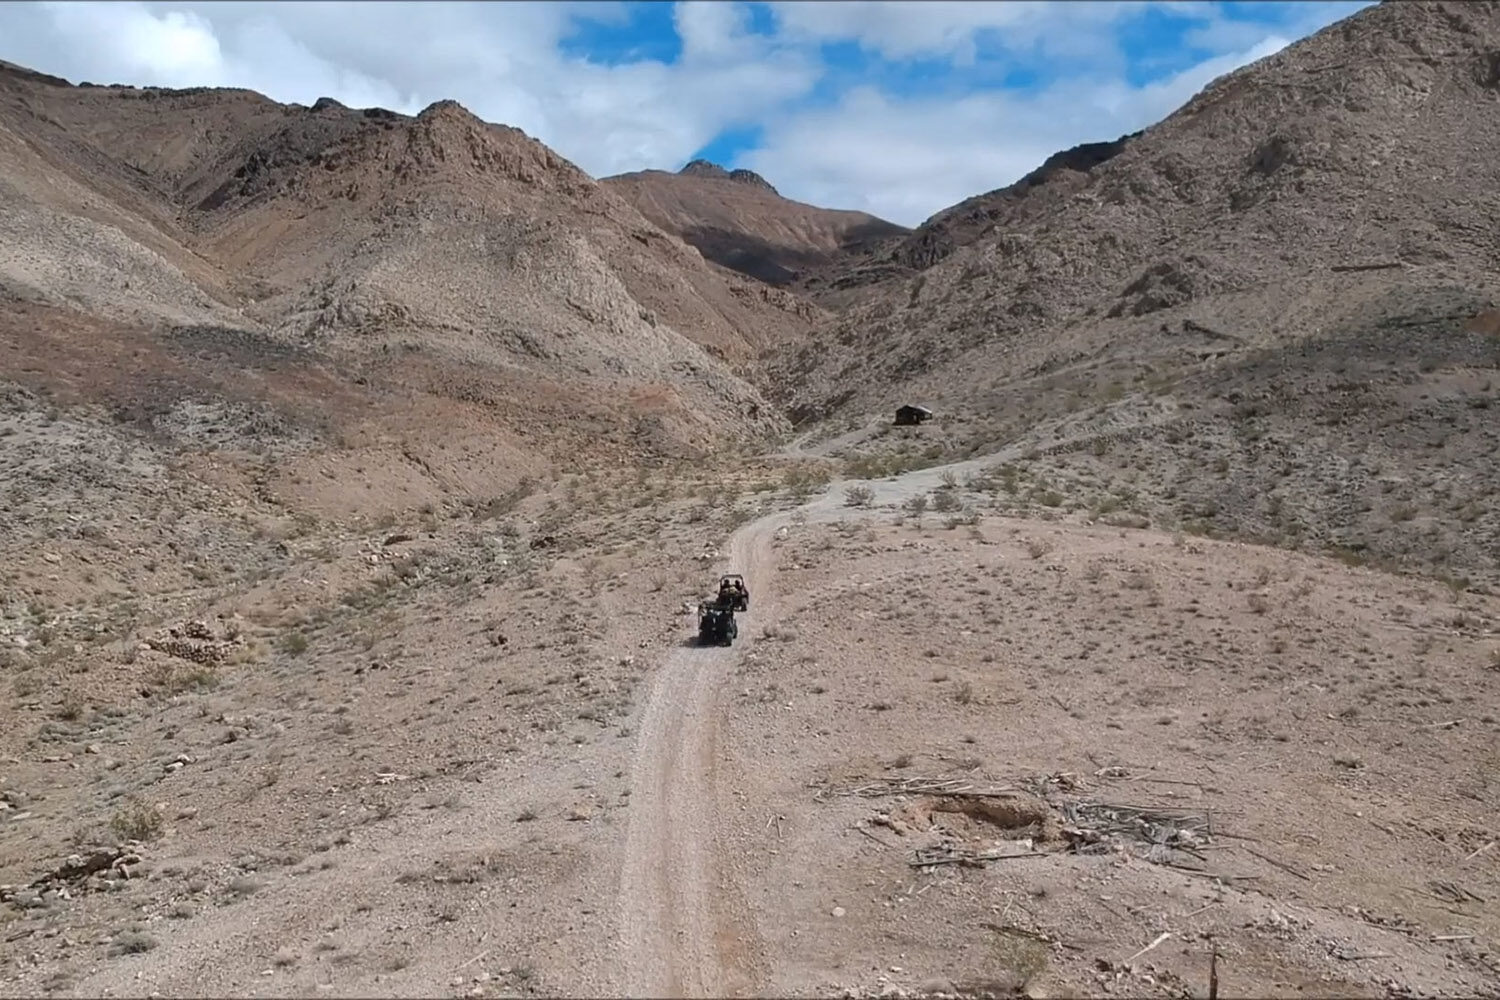 Two ATVs guided through a desert wilderness